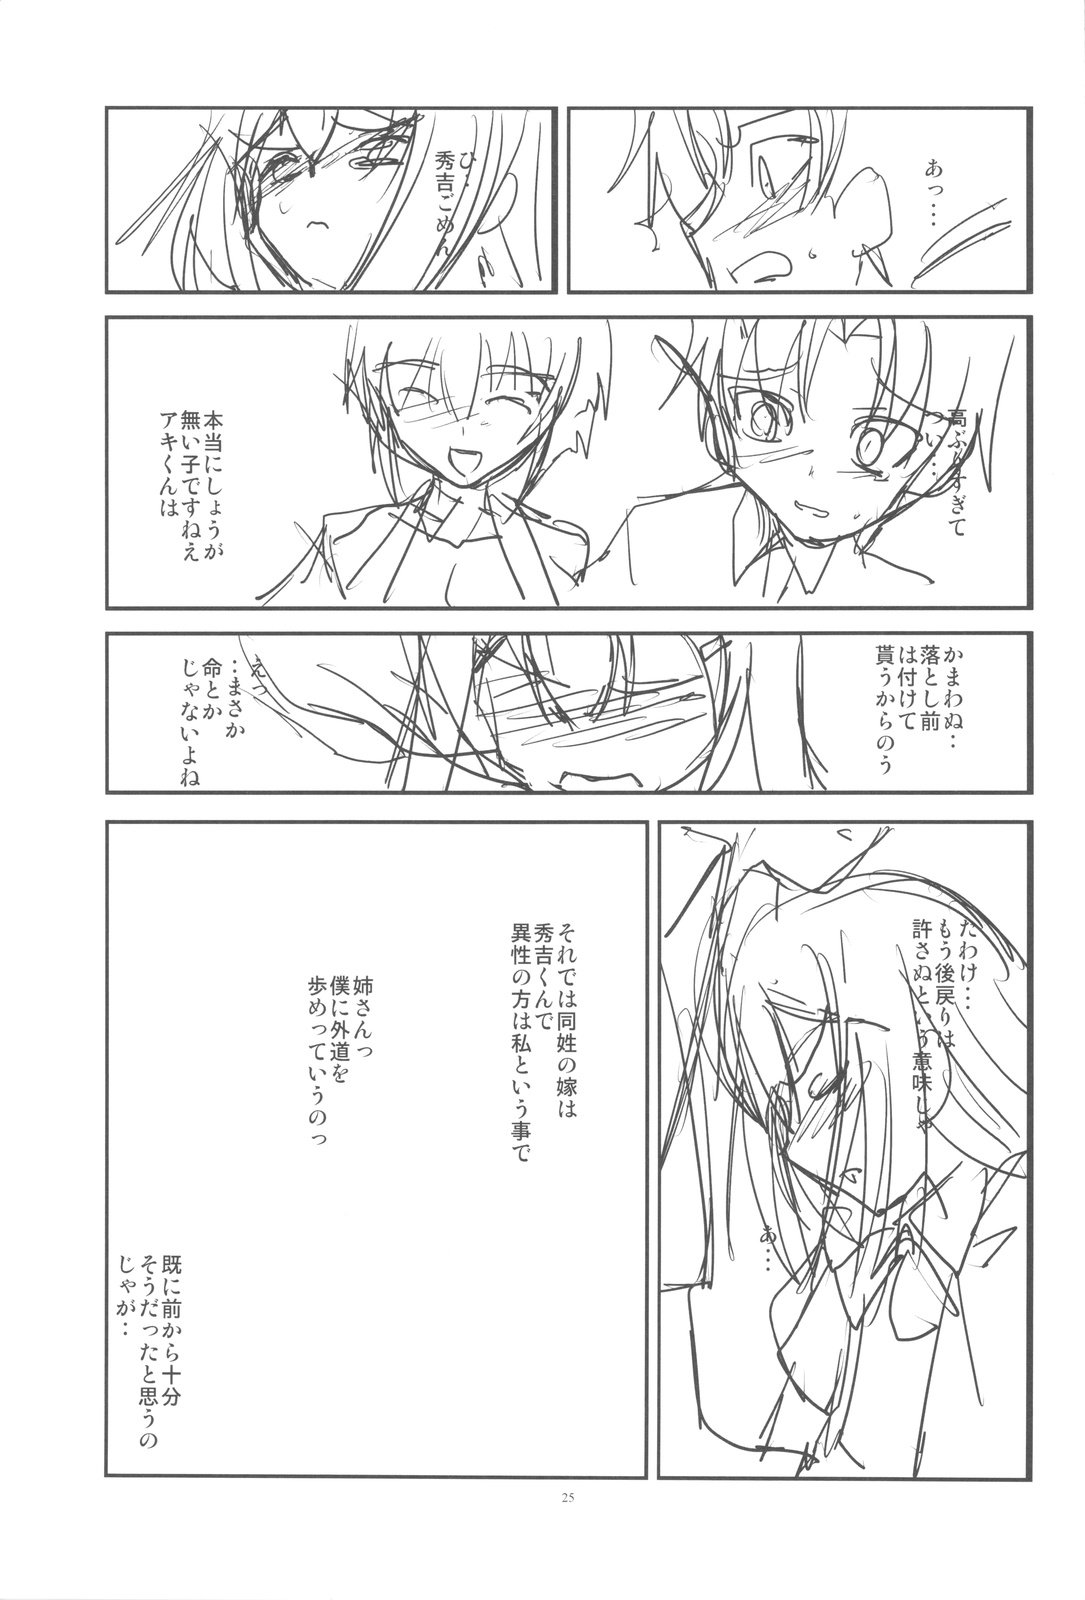 (COMIC1☆4) [R-WORKS] LOVE IS GAME OVER (Baka to Test to Shoukanjuu) page 25 full